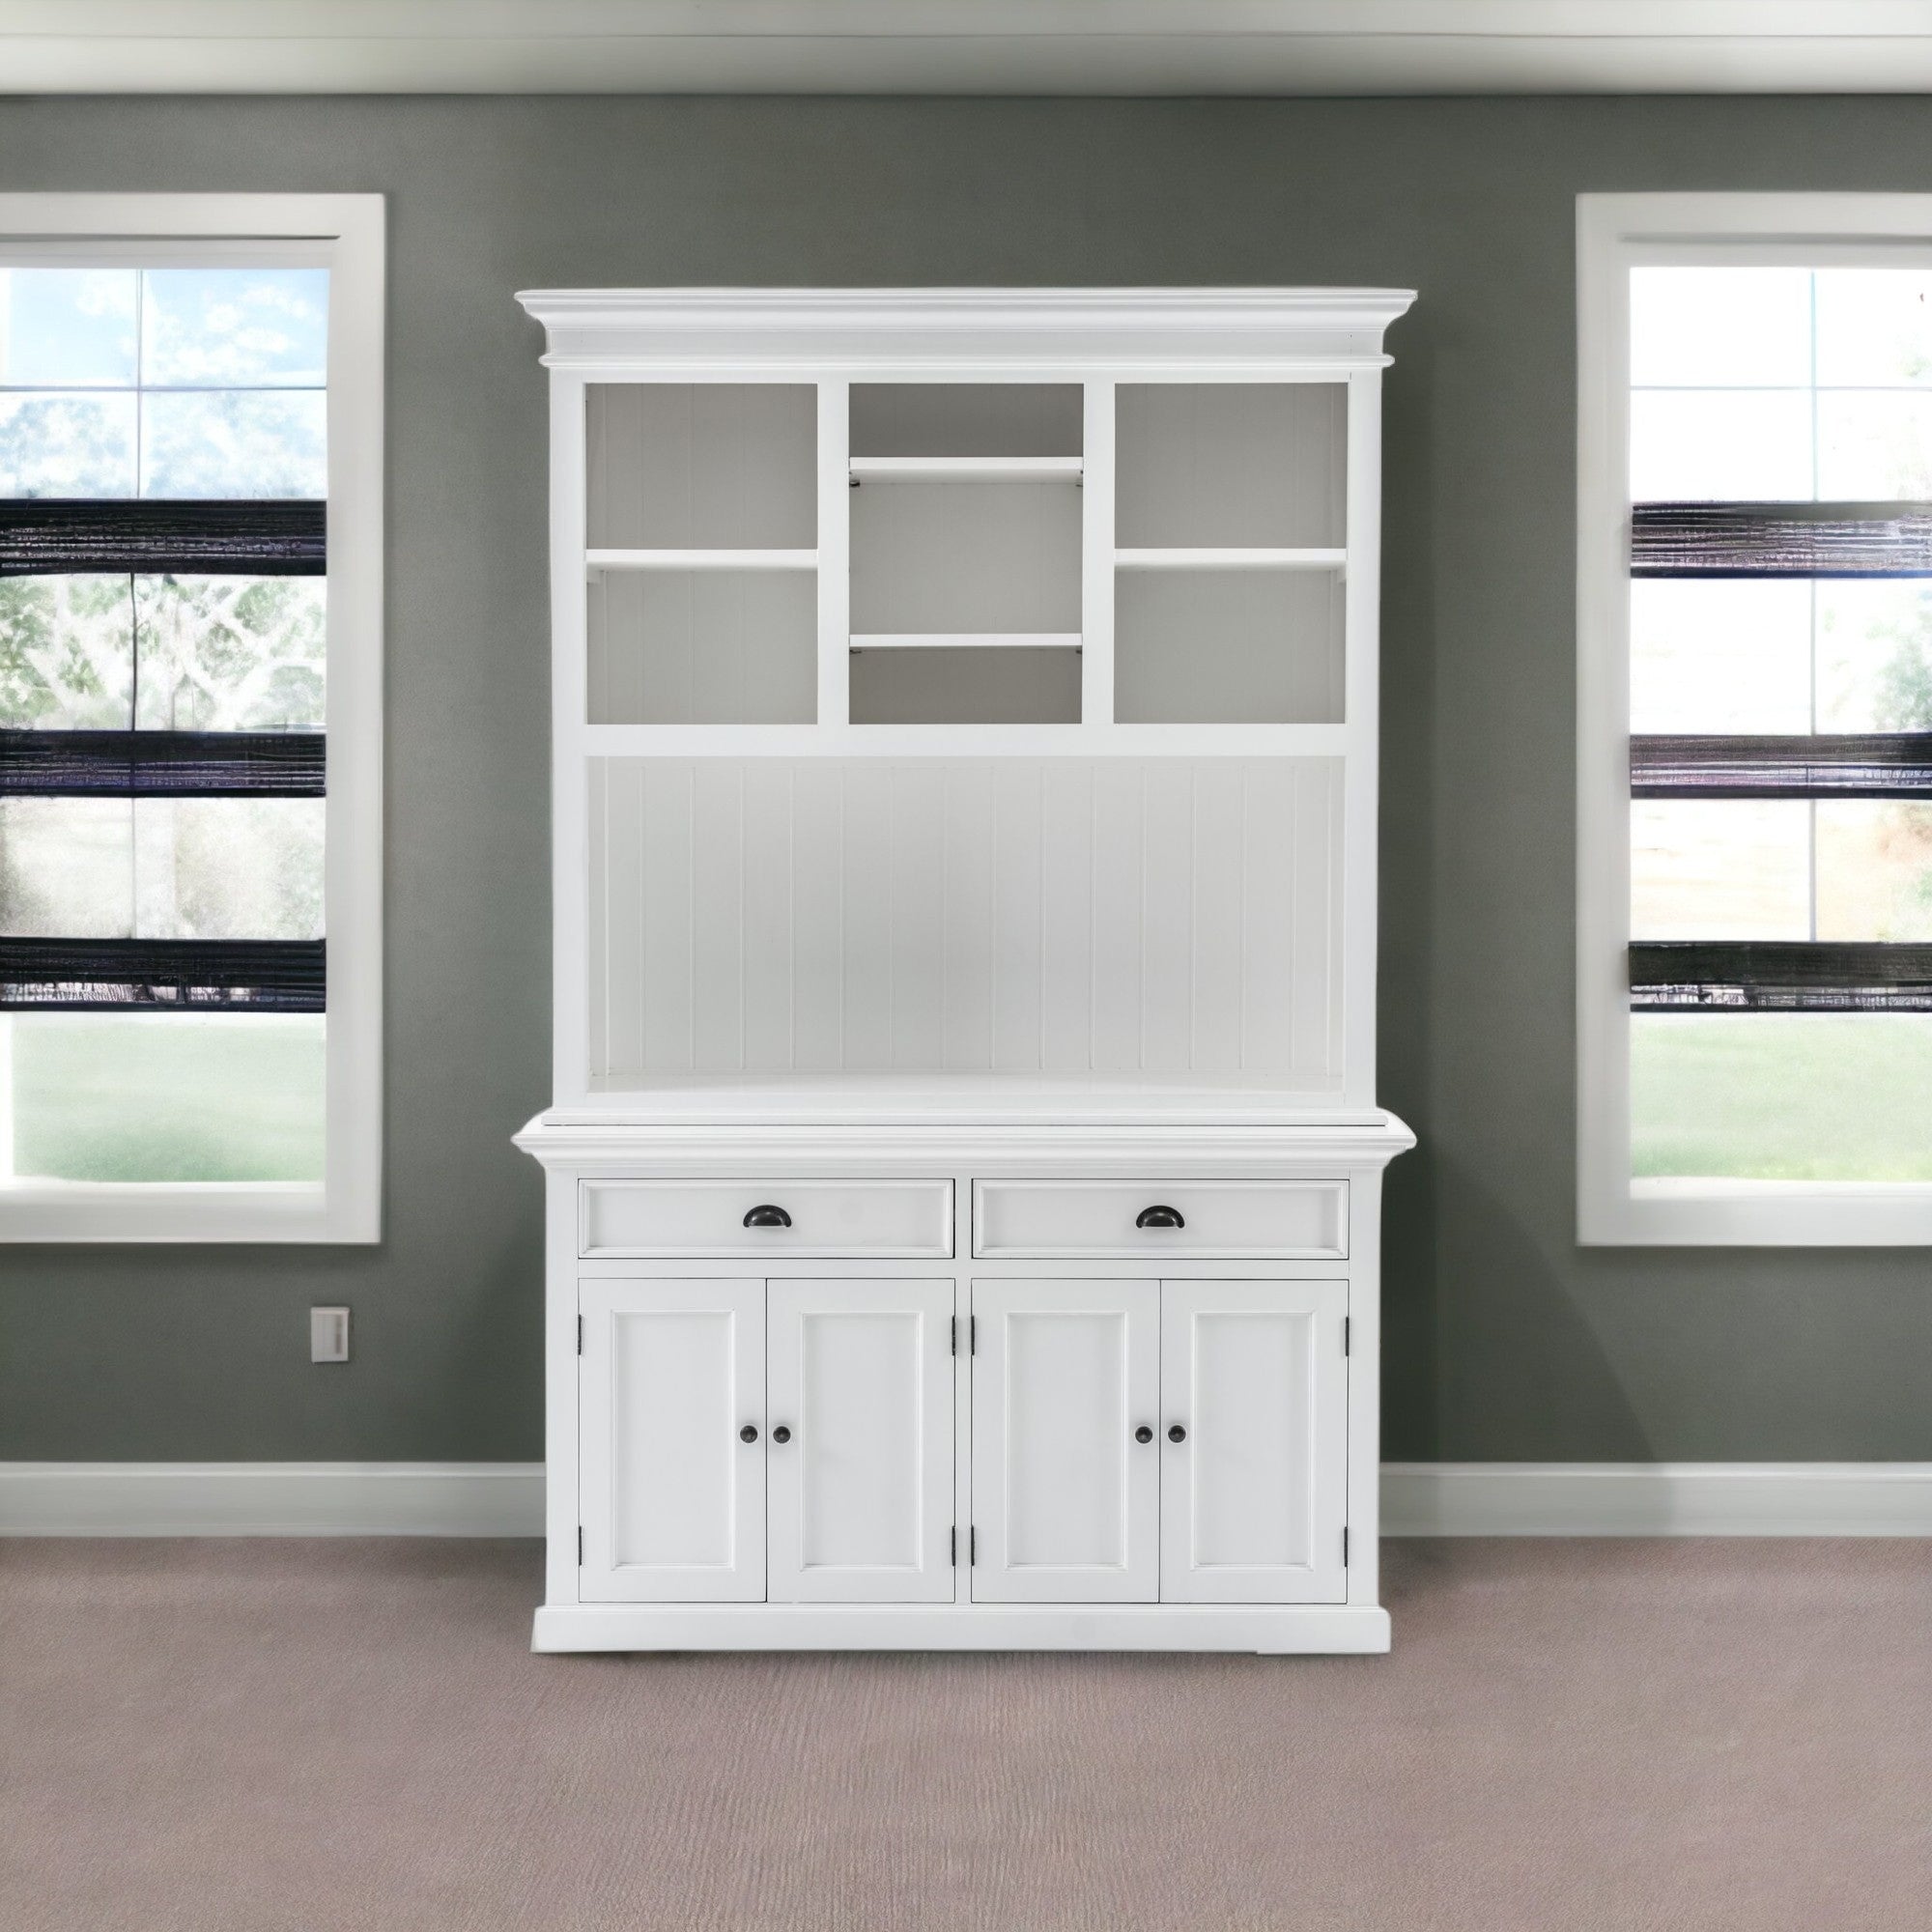 87" White Solid Wood Adjustable Two Tier Bookcase